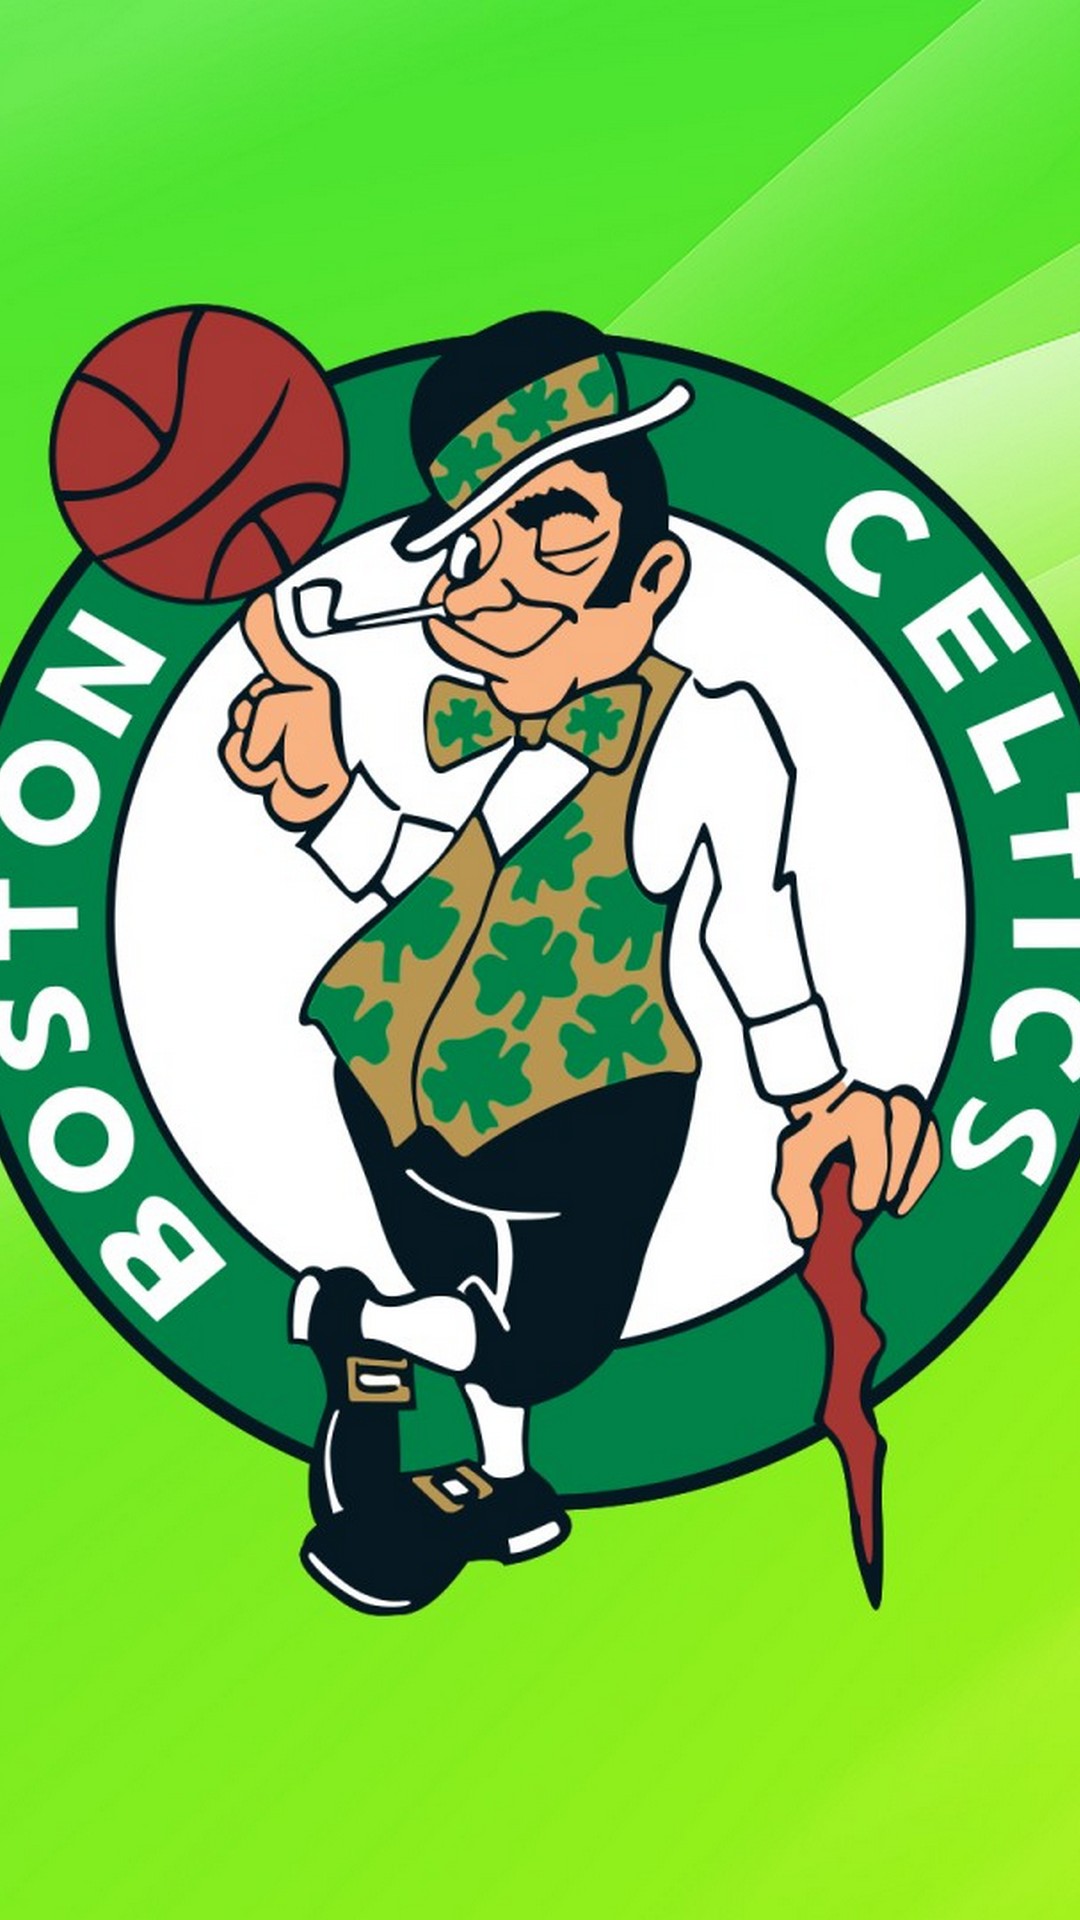 Wallpaper iPhone Boston Celtics with image resolution 1080x1920 pixel. You can make this wallpaper for your iPhone 5, 6, 7, 8, X backgrounds, Mobile Screensaver, or iPad Lock Screen